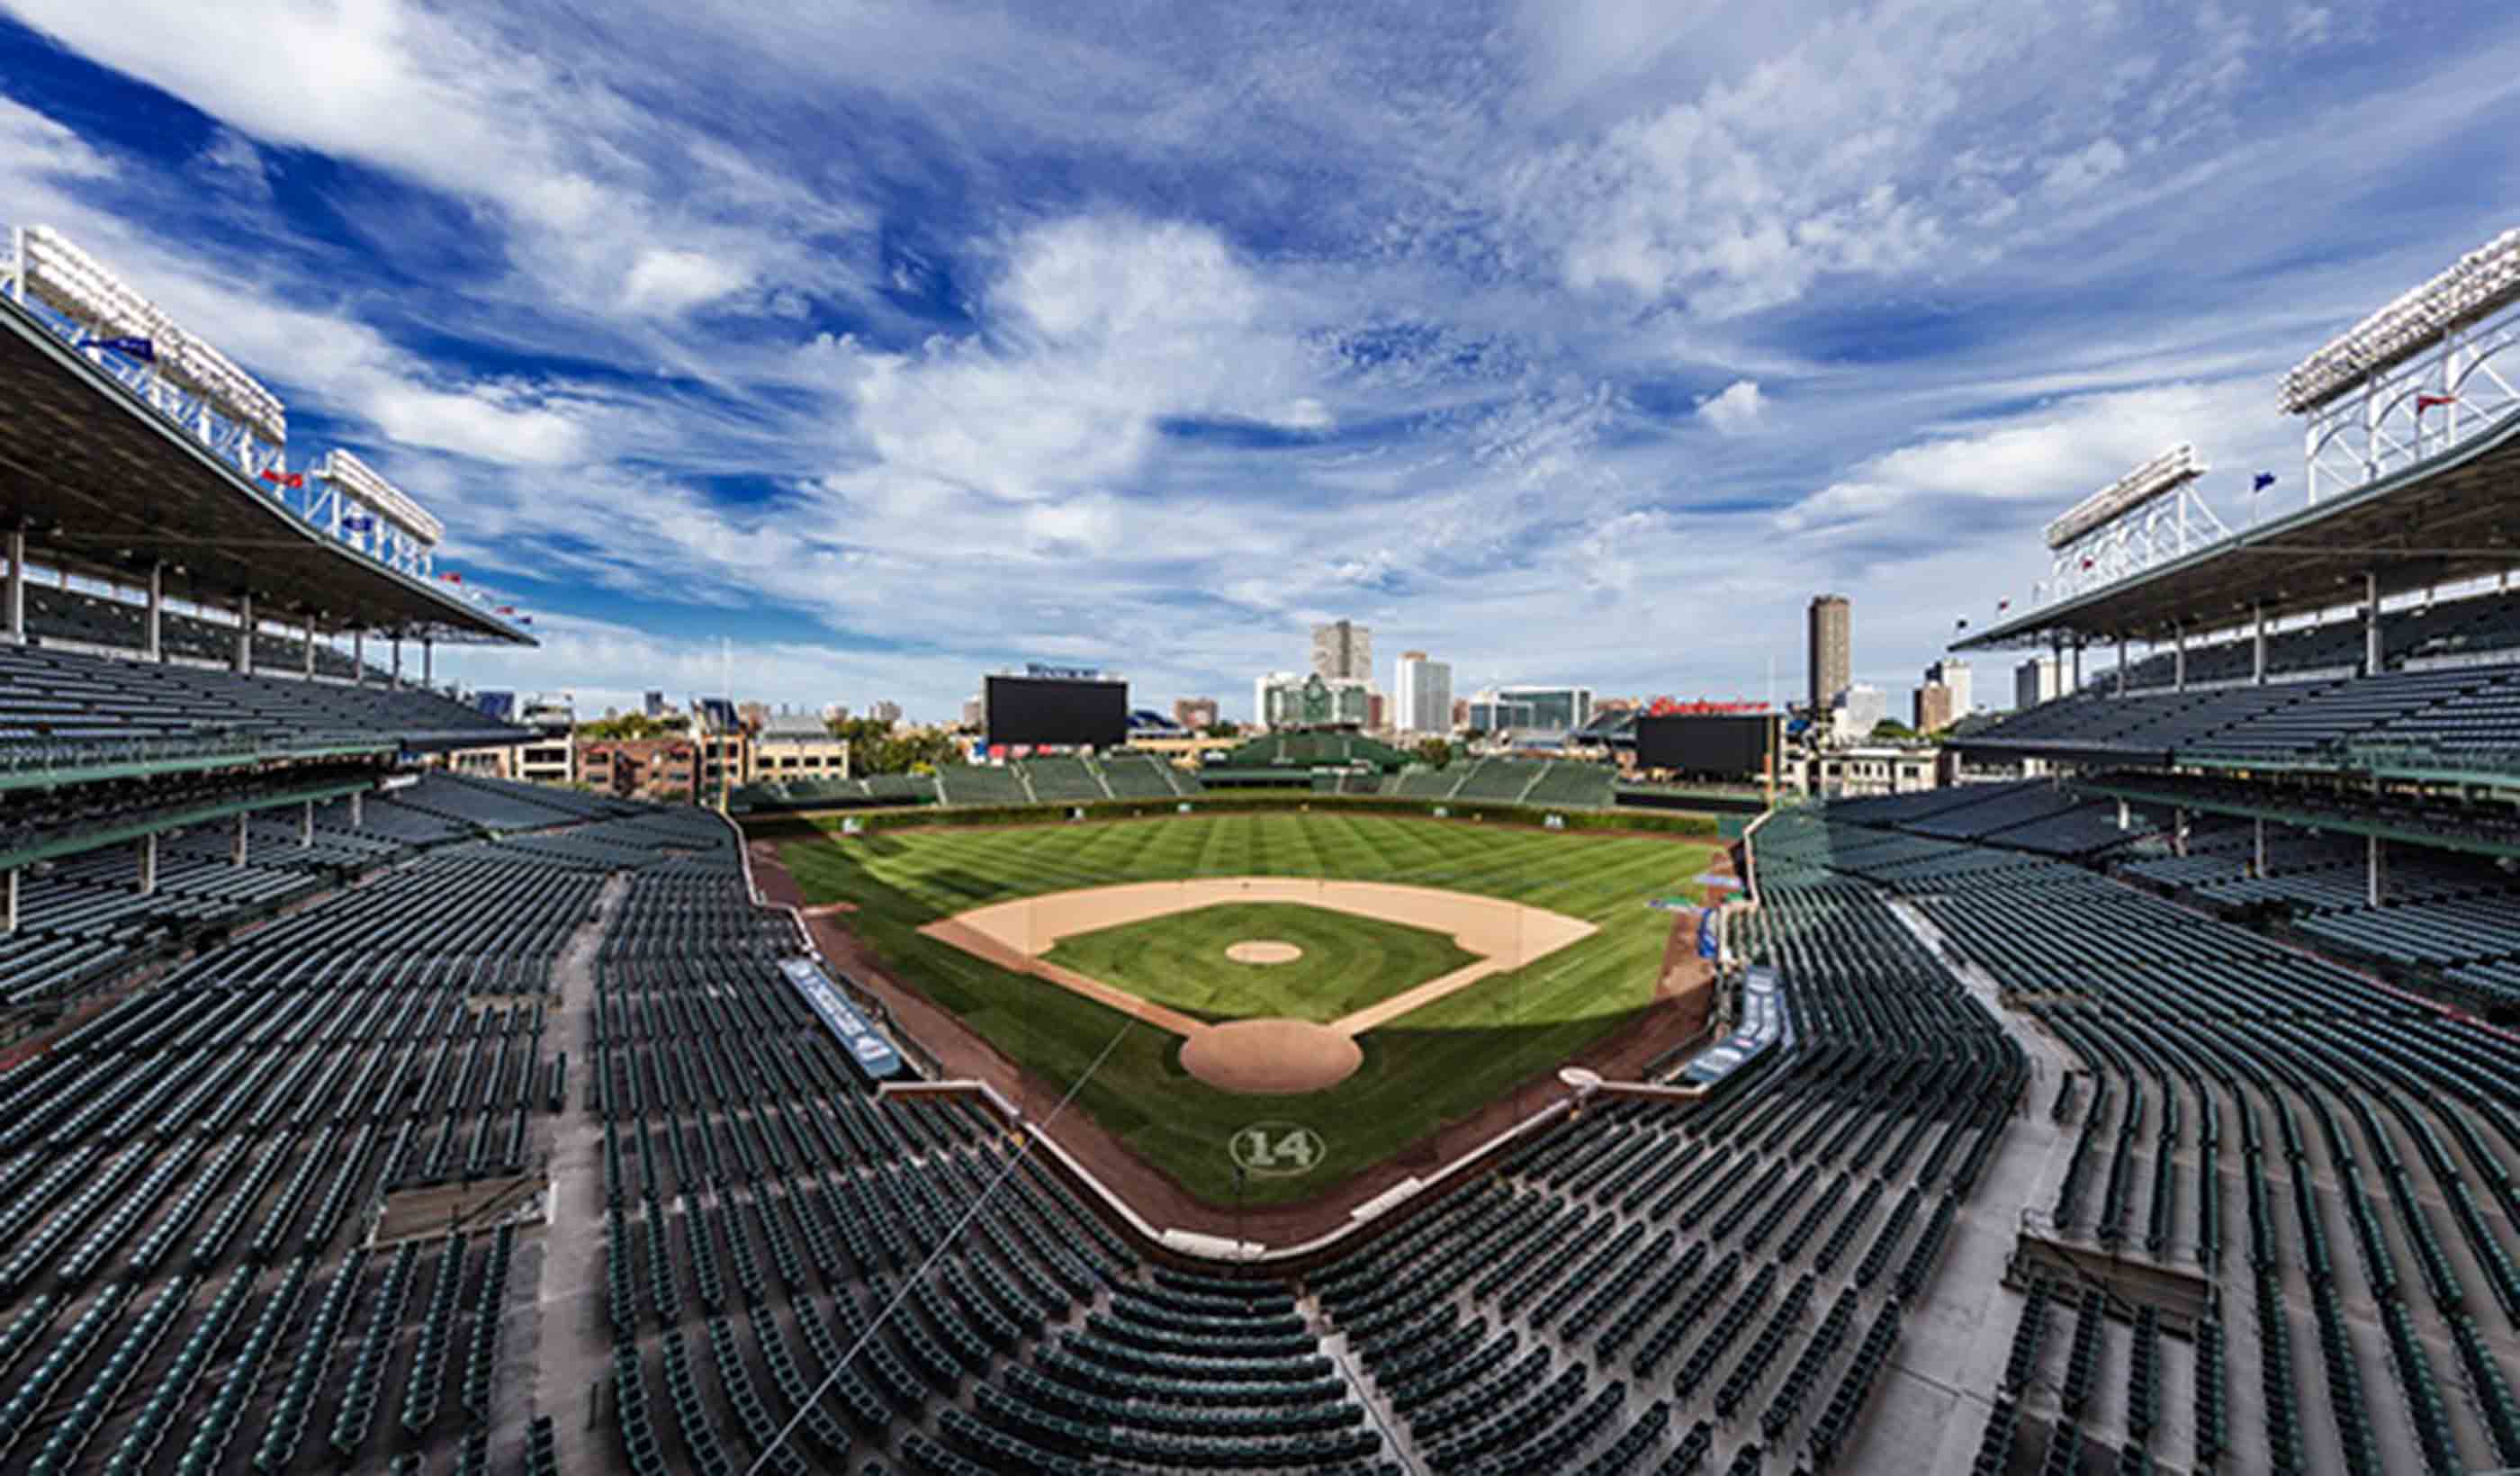 The renovation of iconic Wrigley Field is an example of large-scale building recycling